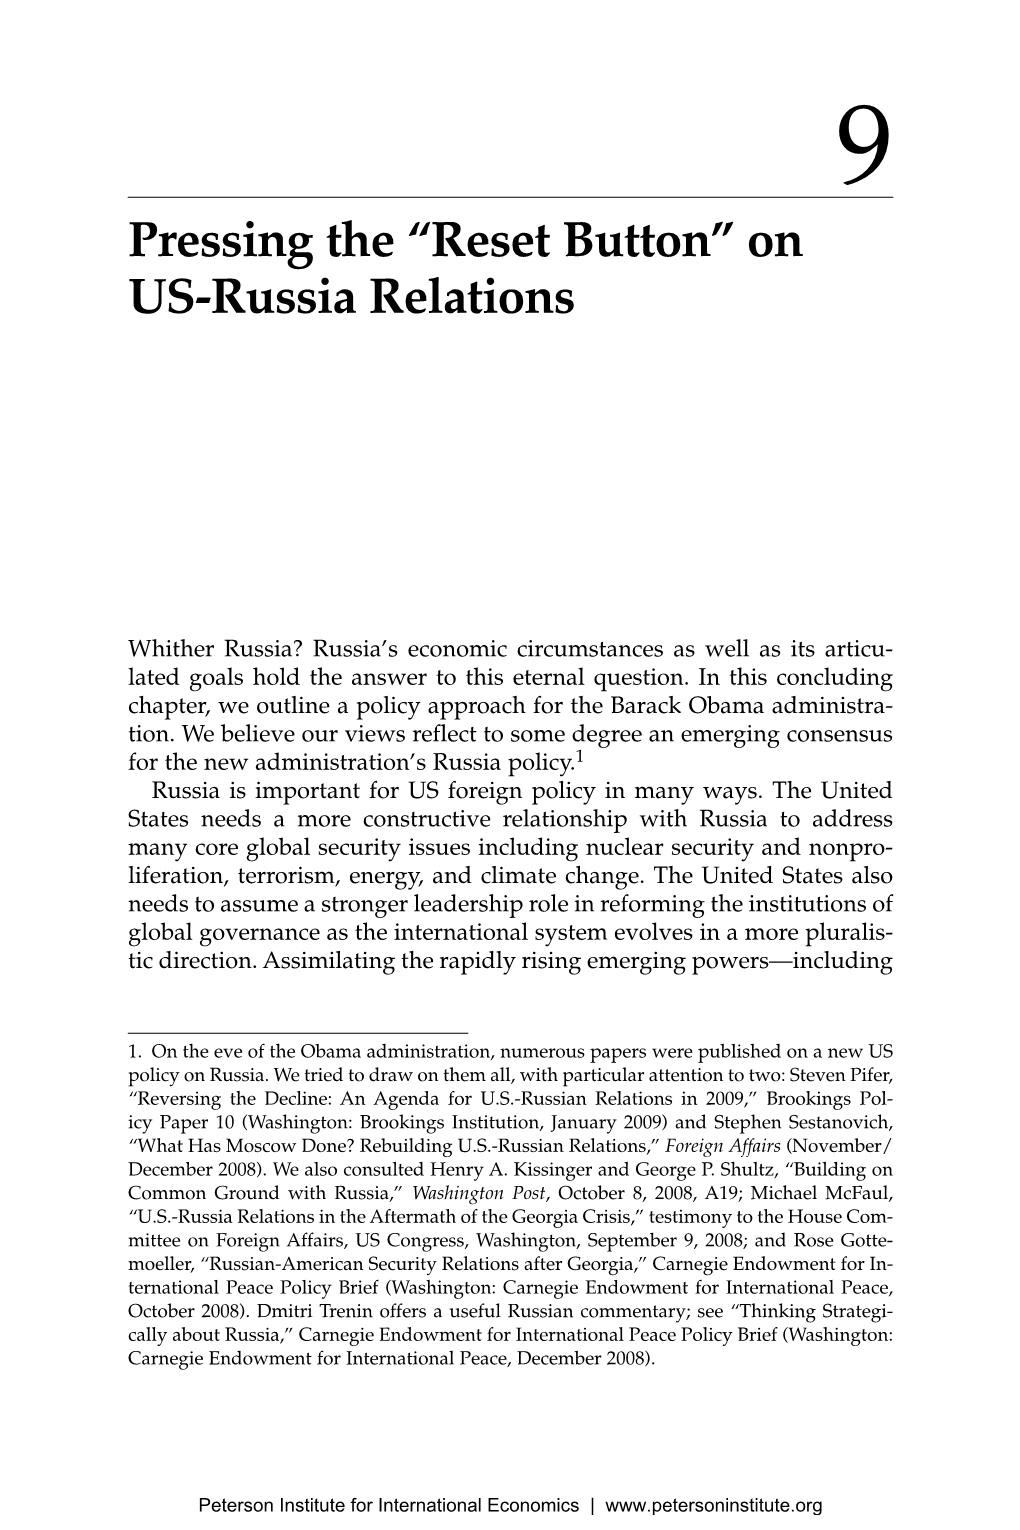 Reset Button” on US-Russia Relations